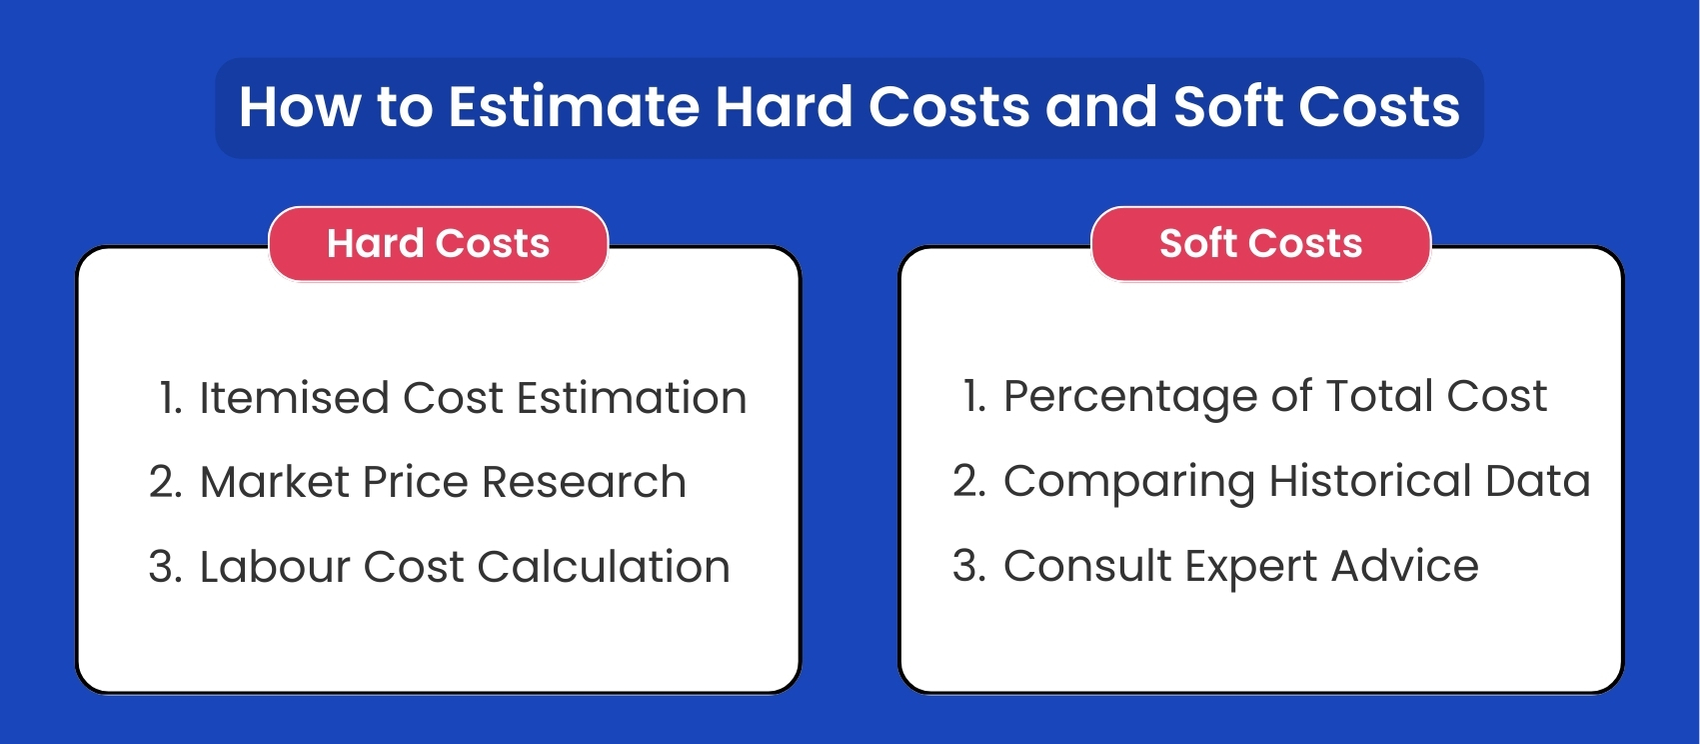 How to Estimate Hard Costs and Soft Costs 